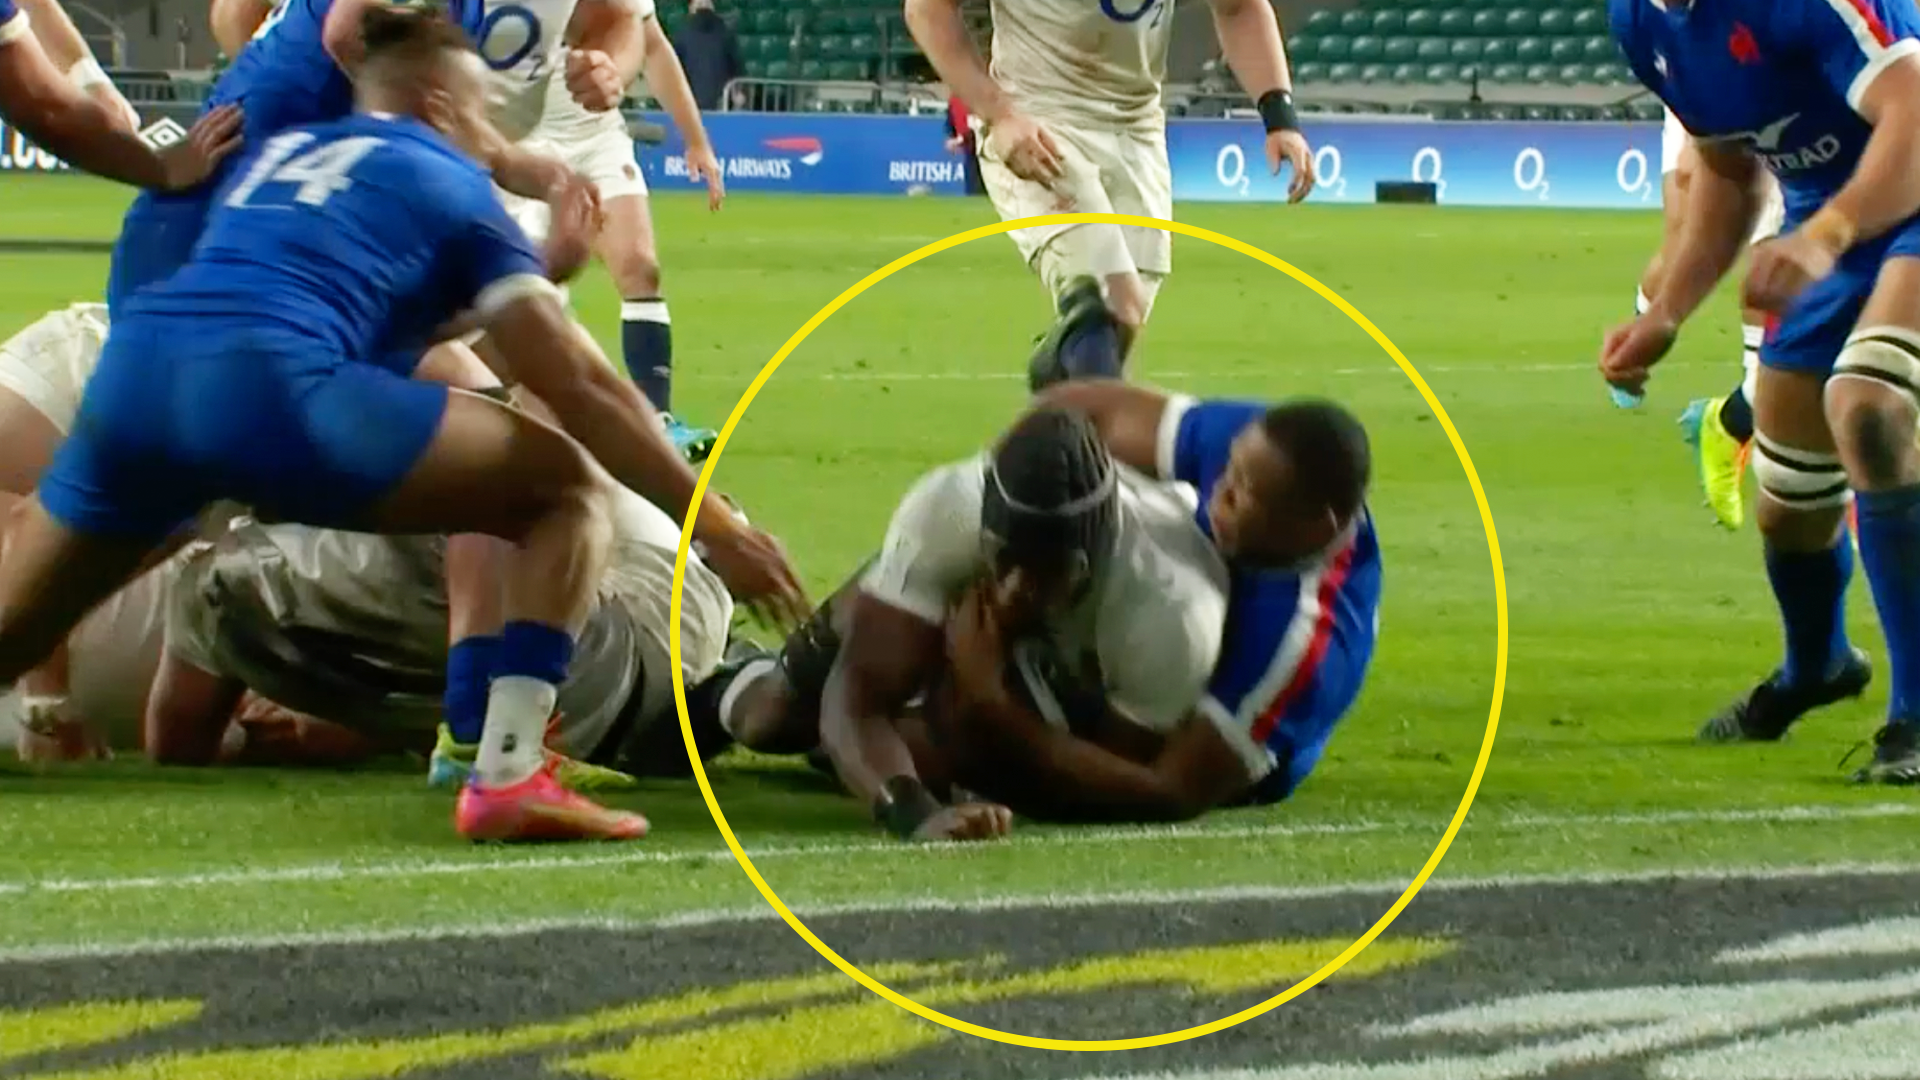 New angle definitively proves whether Maro Itoje did or didn't score THAT try against France